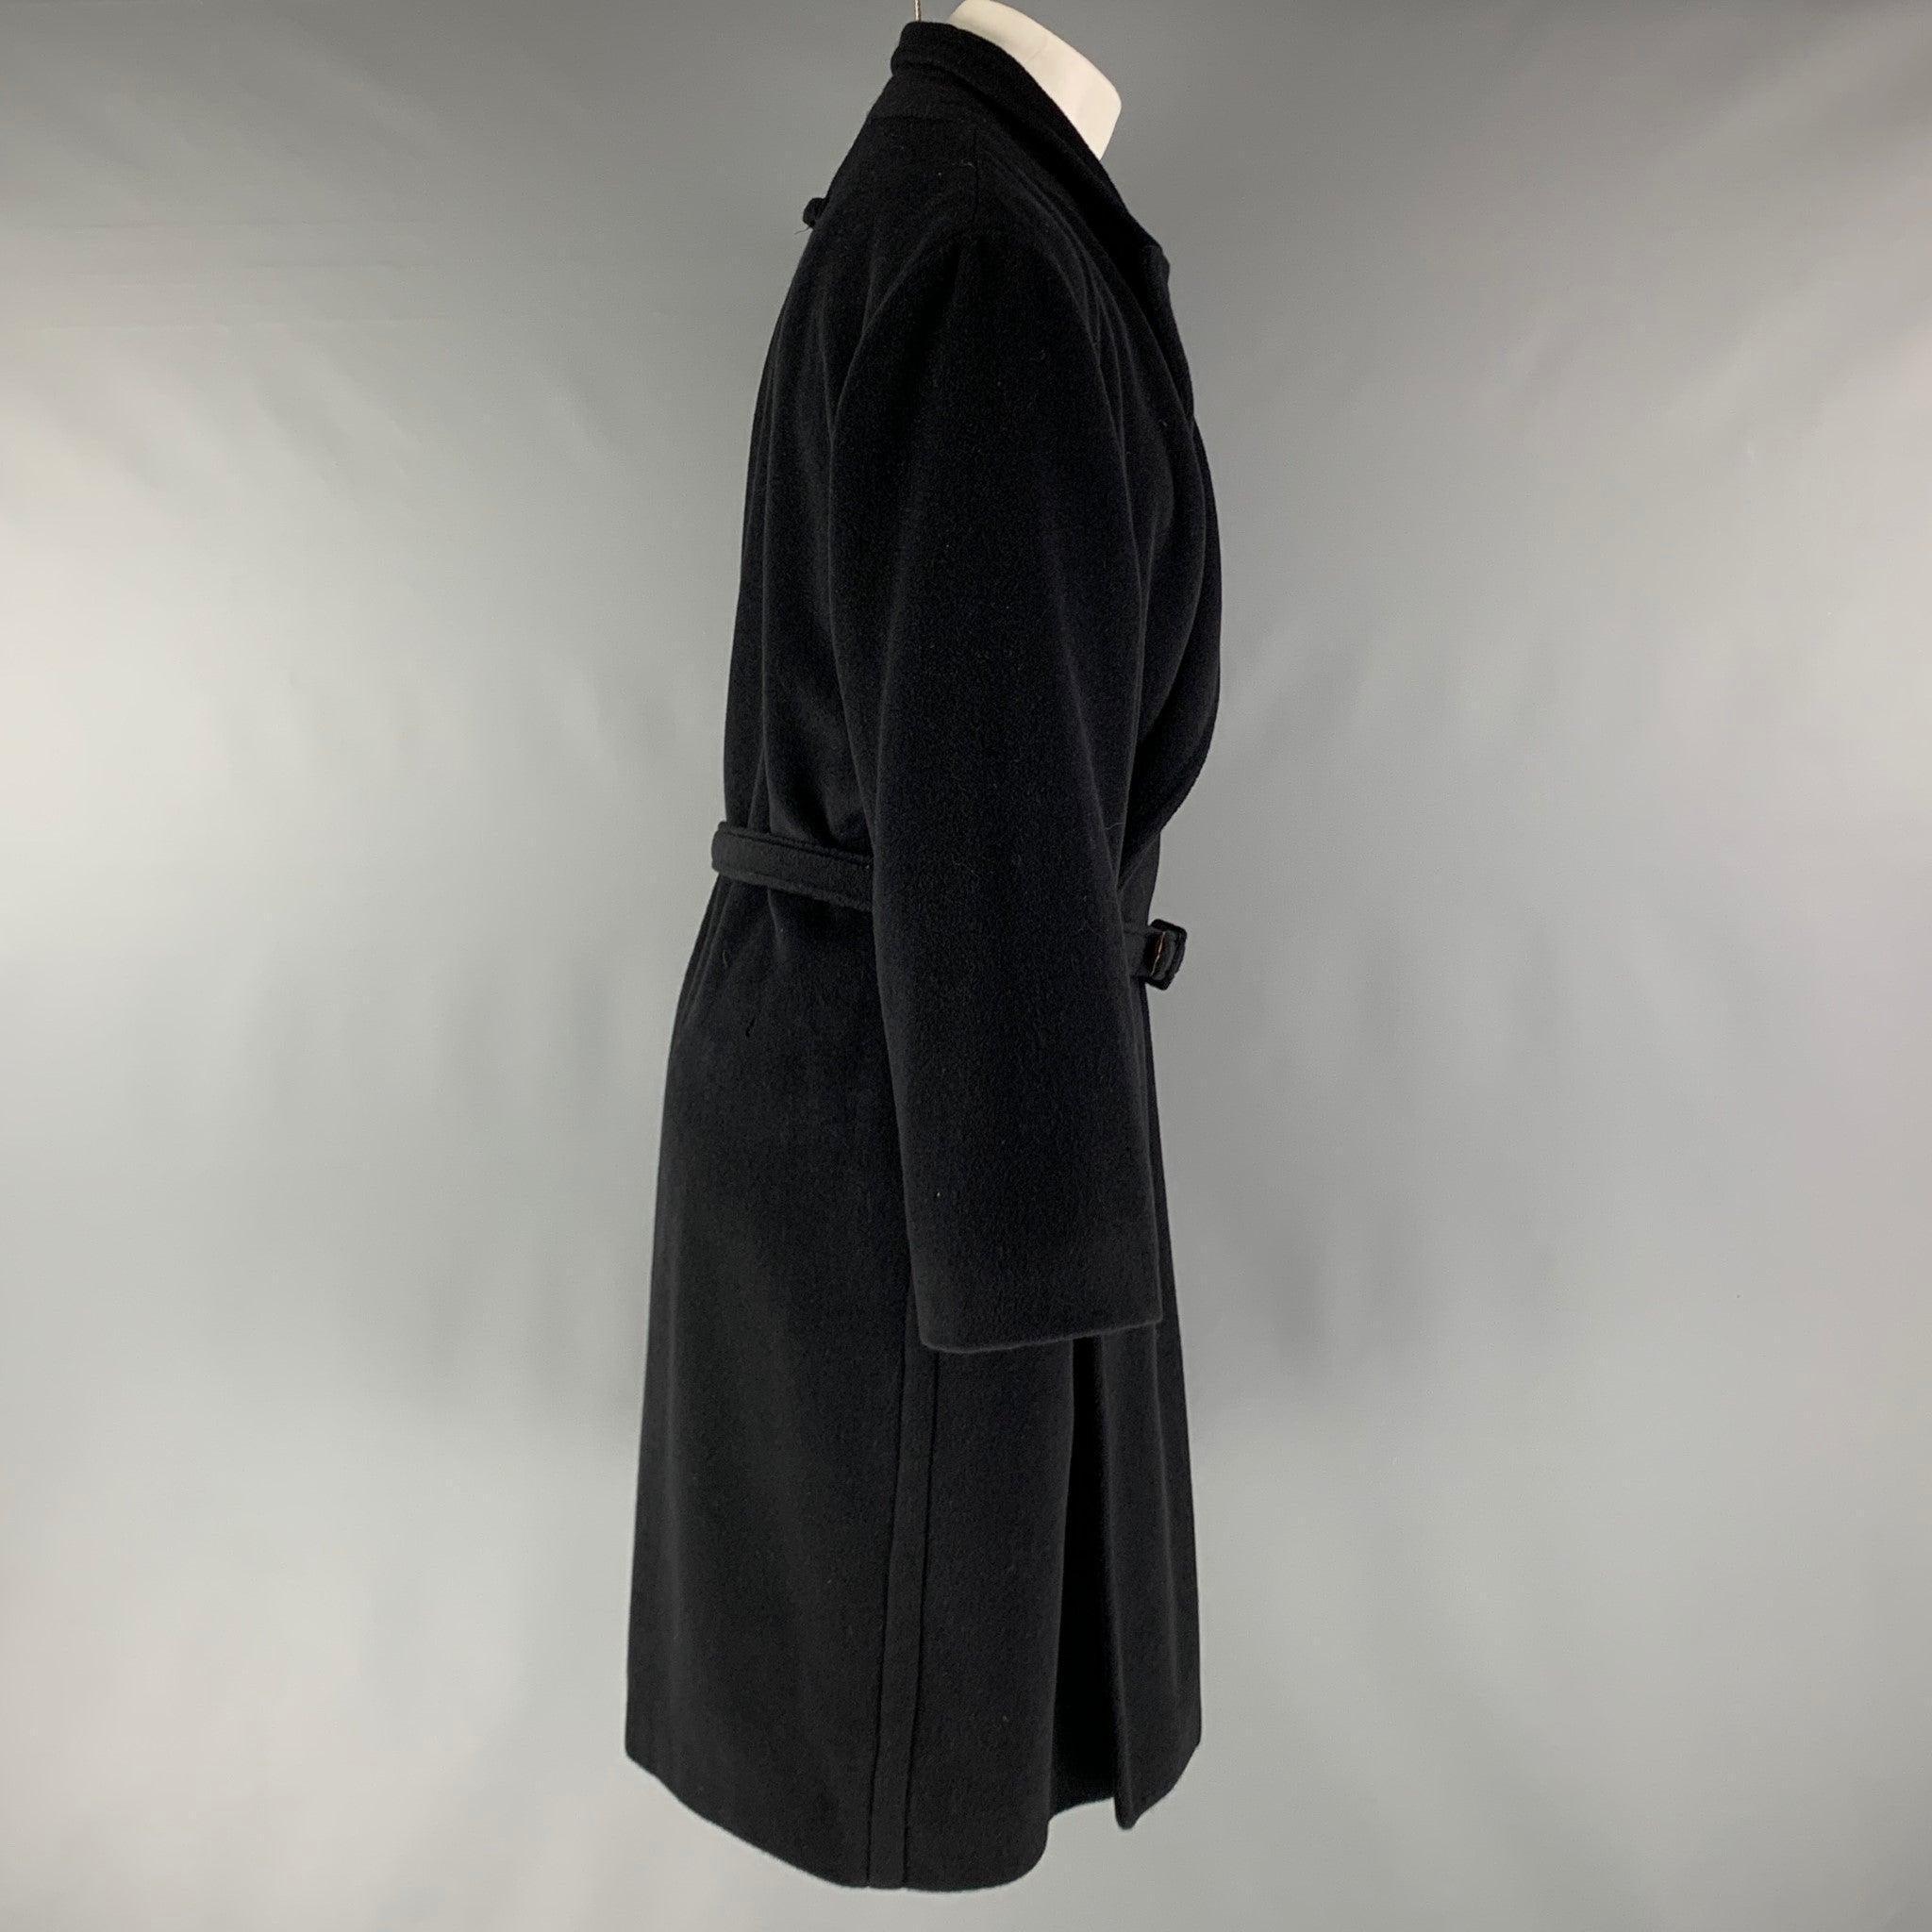 JEAN PAUL GAULTIER Size 38 Black Angora Wool Belted Coat In Good Condition For Sale In San Francisco, CA